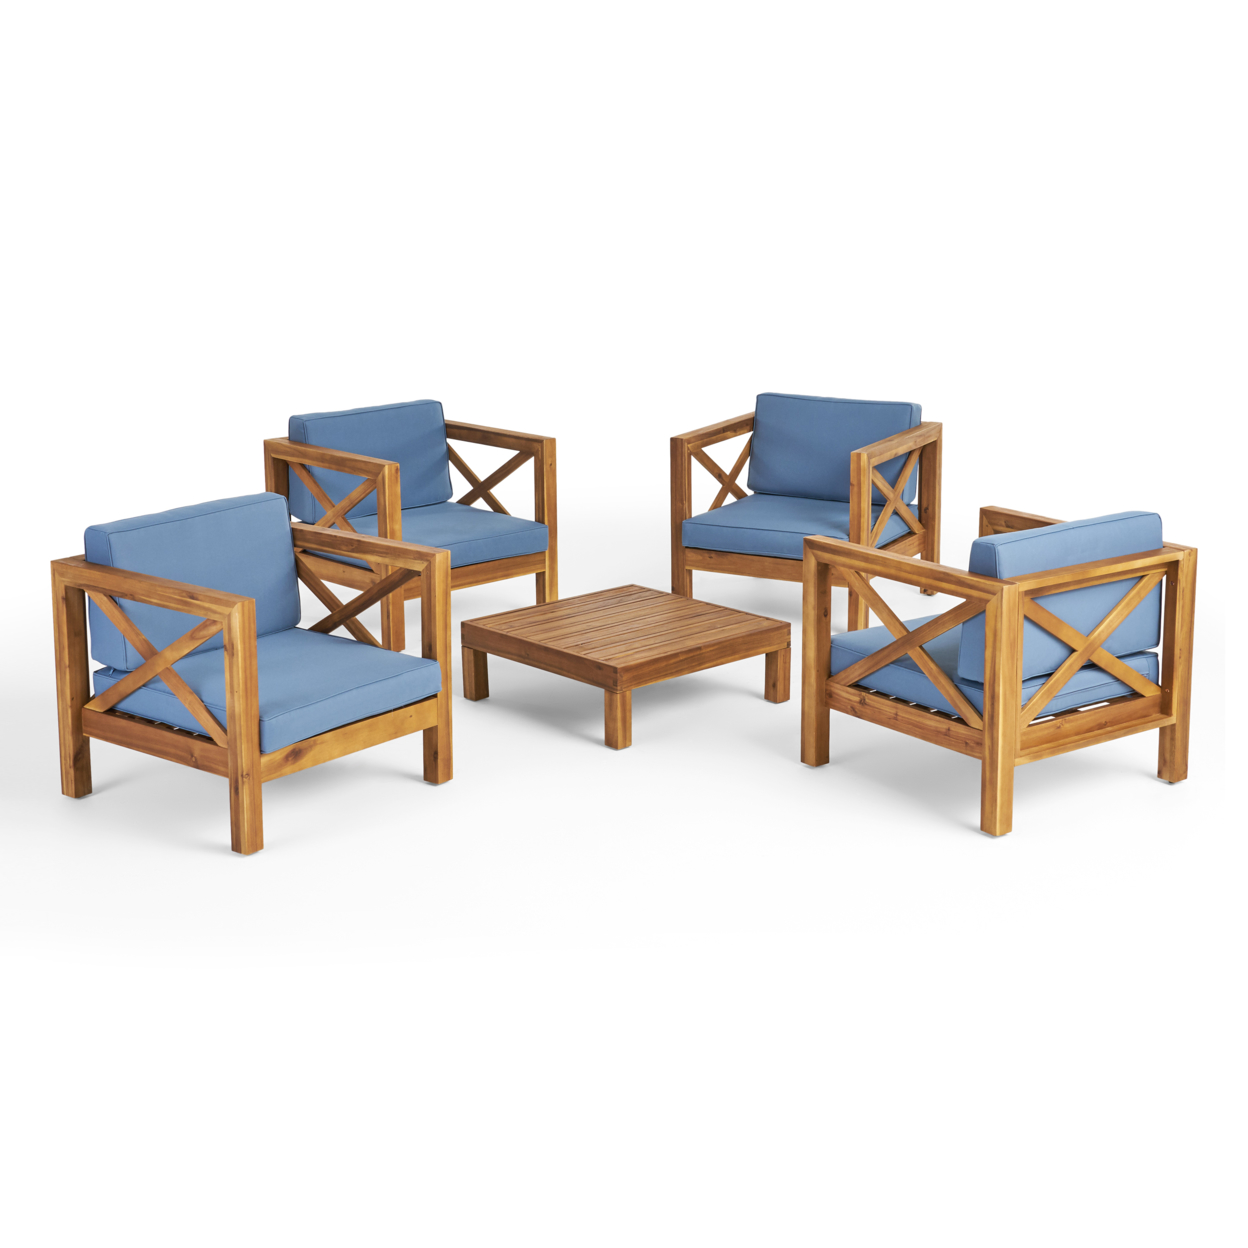 Morgan Outdoor 4 Seater Acacia Wood Club Chair And Coffee Table Set - Gray Finish + White